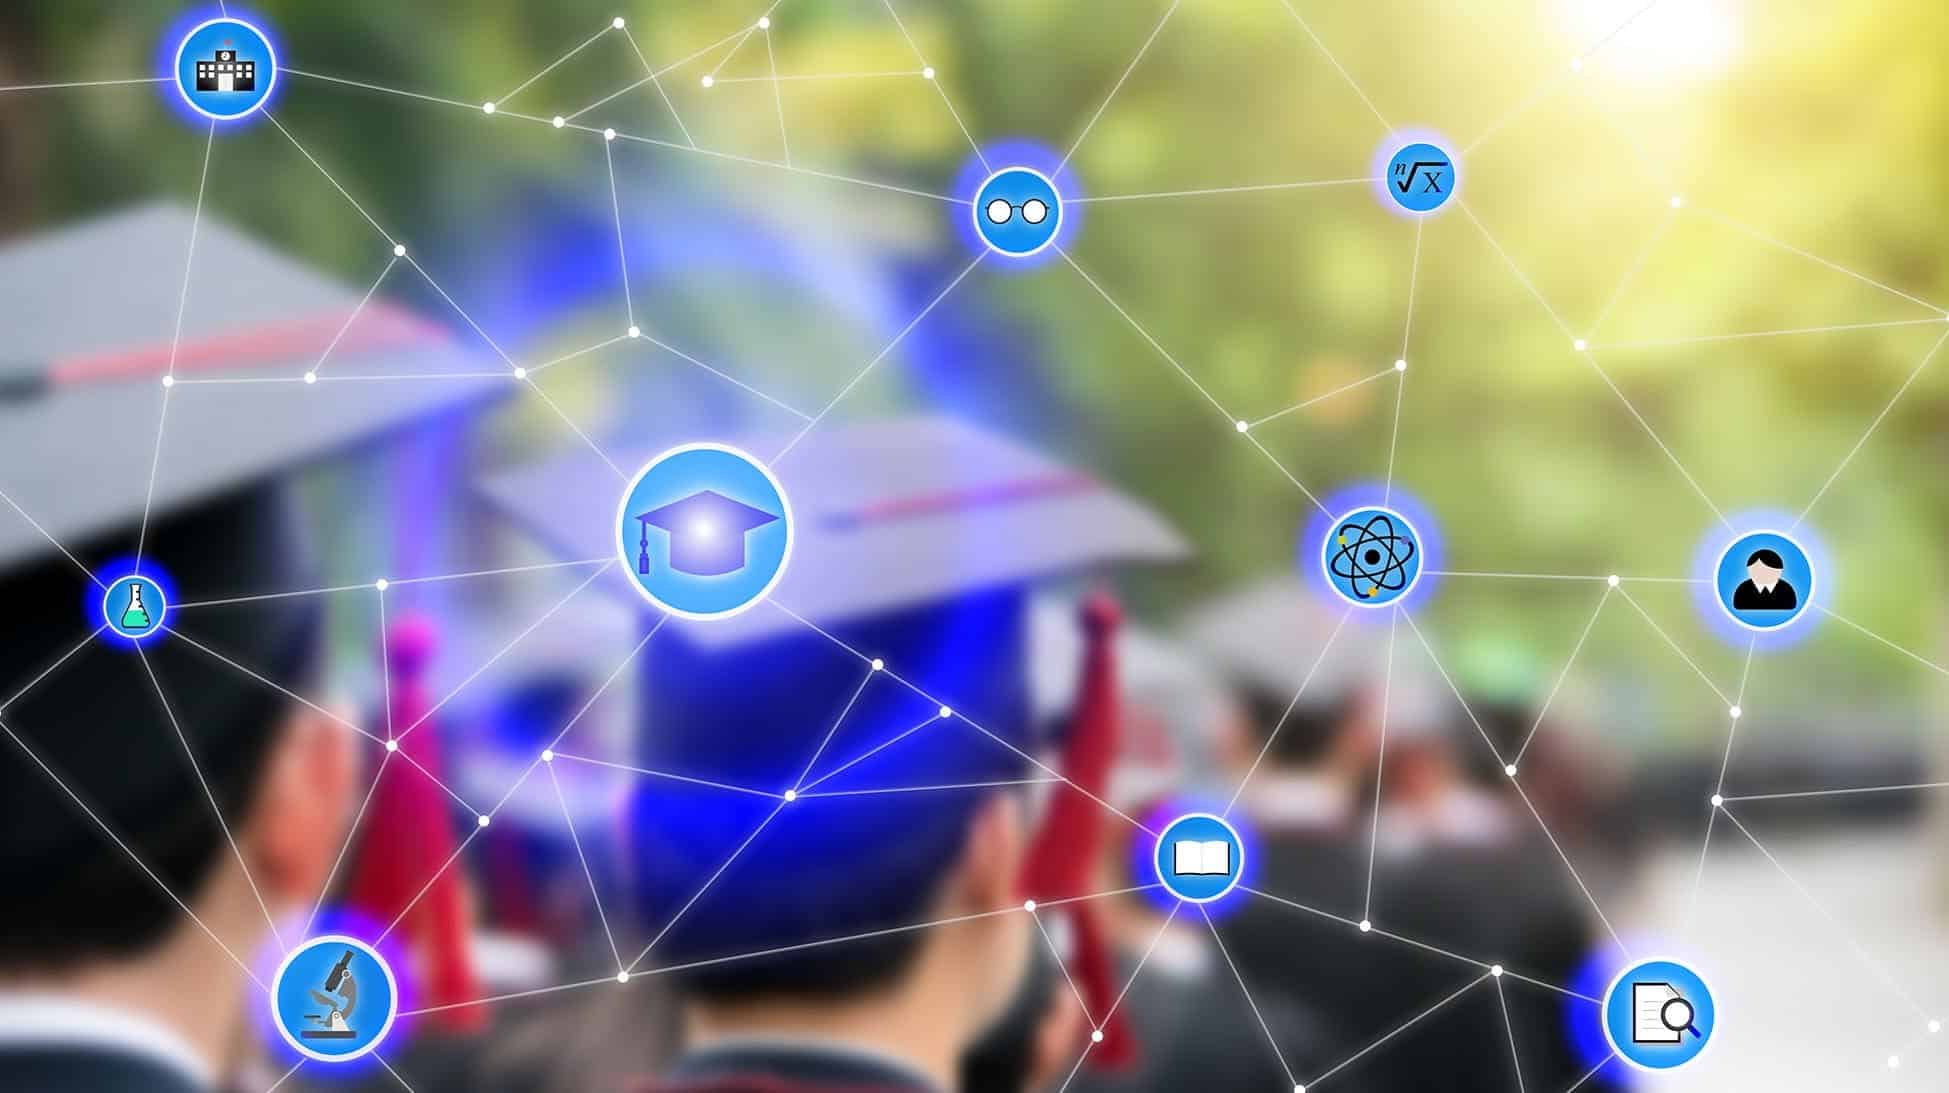 University of Bahrain is going to present Diplomas on the Blockchain Employing Blockcerts